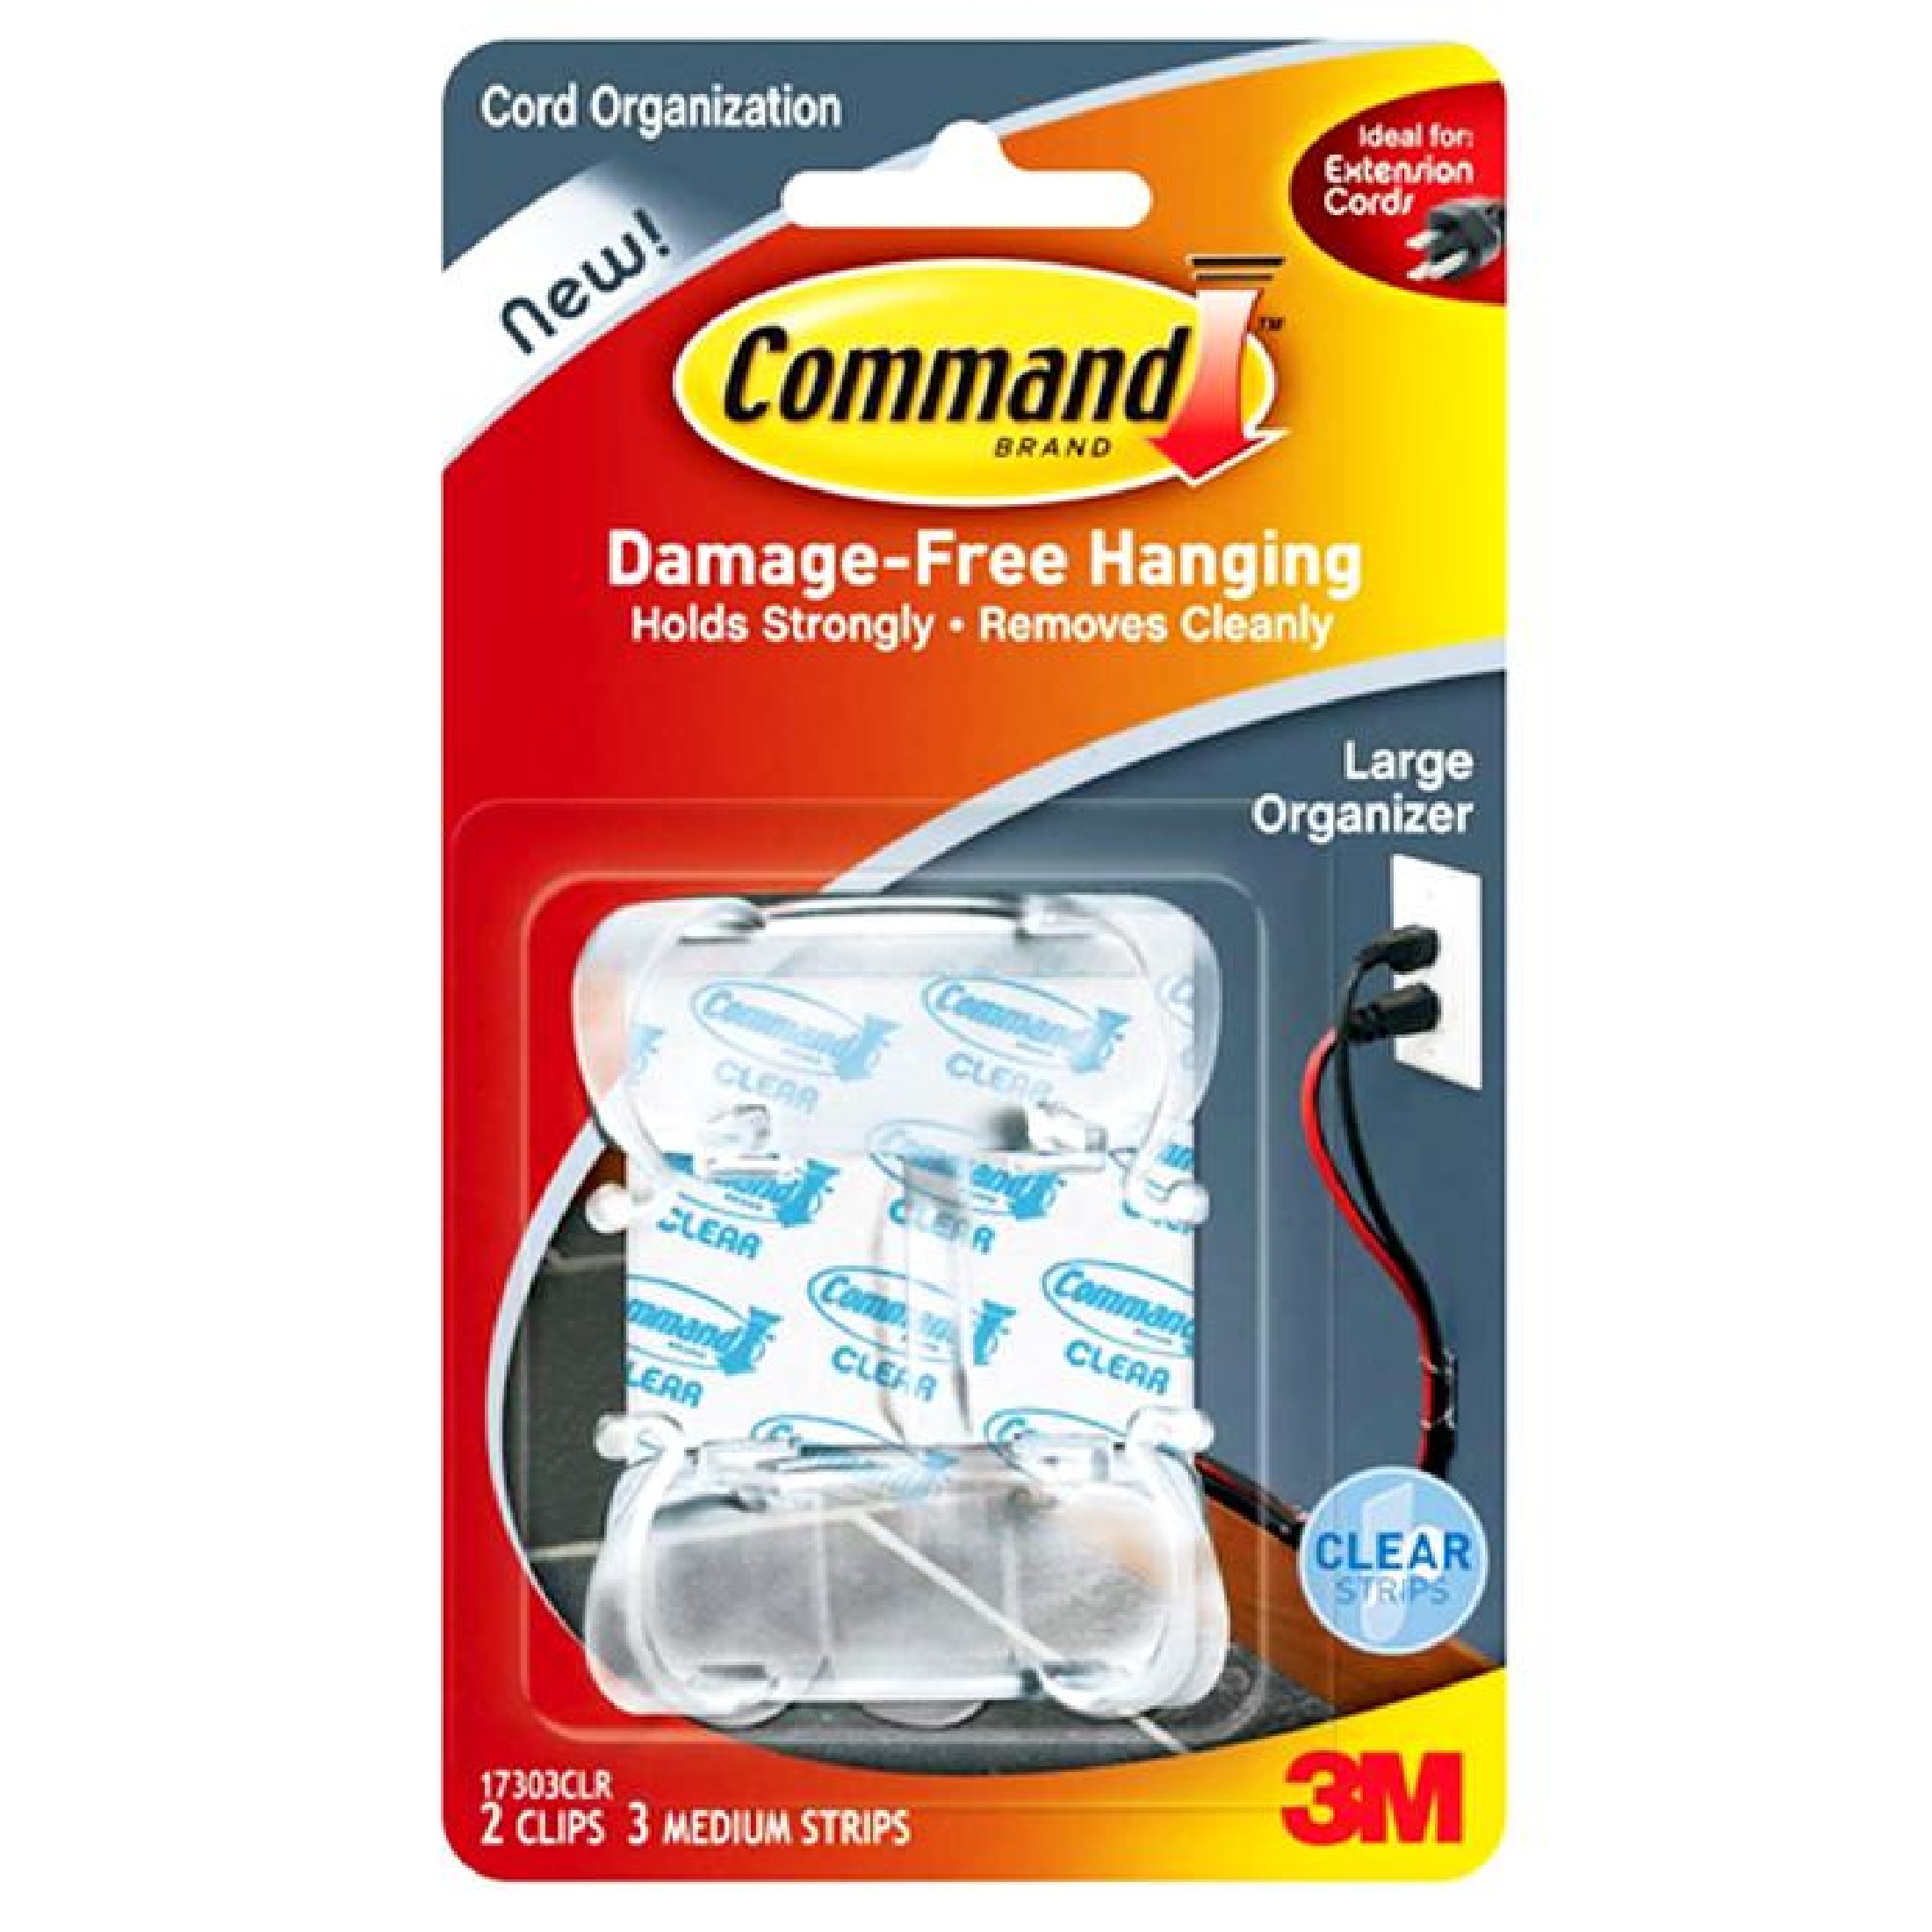 3M Command 17303CLR Clear Large Cord Organizer